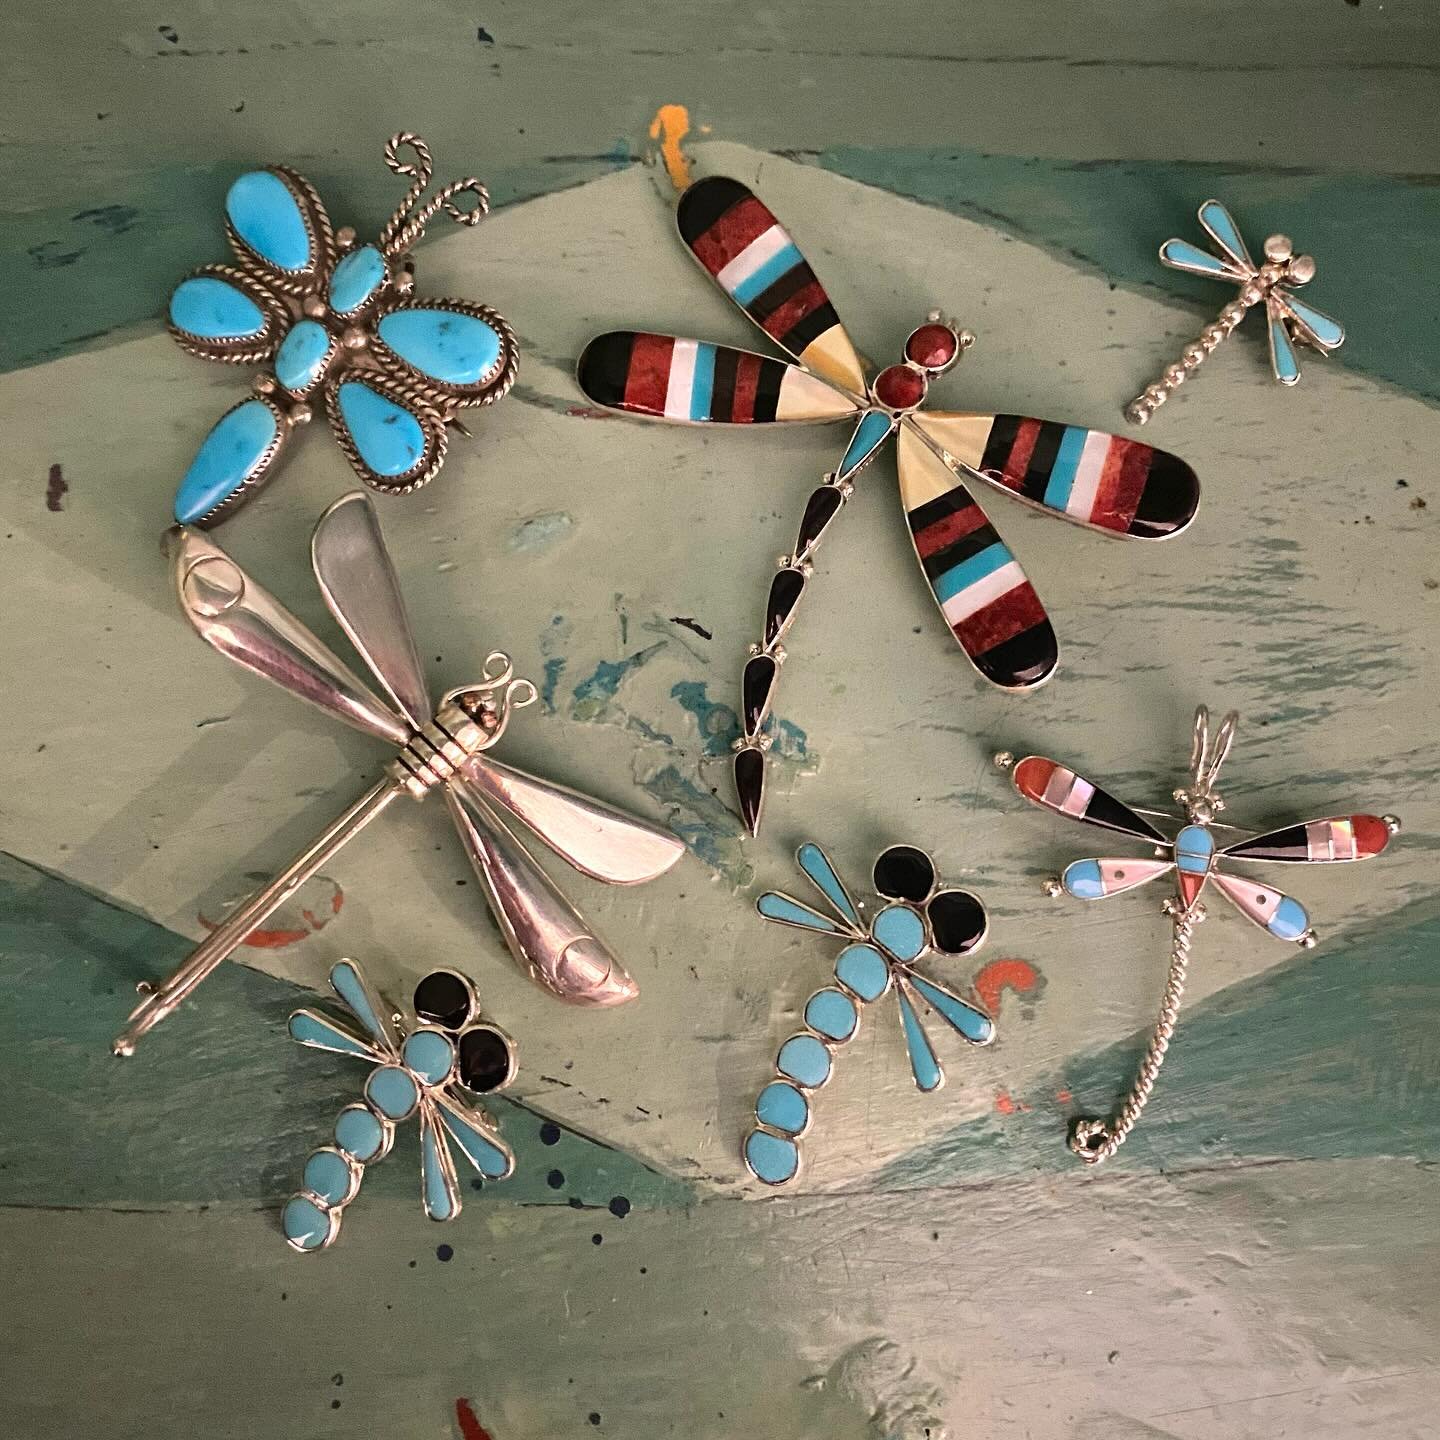 &ldquo;D&rdquo; Is for Dragonfly 🌞 some luscious brooches from William Spratling , The Navajo Nation,&amp; Zuni Pueblo ❤️ &hellip; hand made from start to finish with Sterling Silver, Arizona Turquoise, Jet Stone, Mother of Pearl, Coral&hellip;&amp;